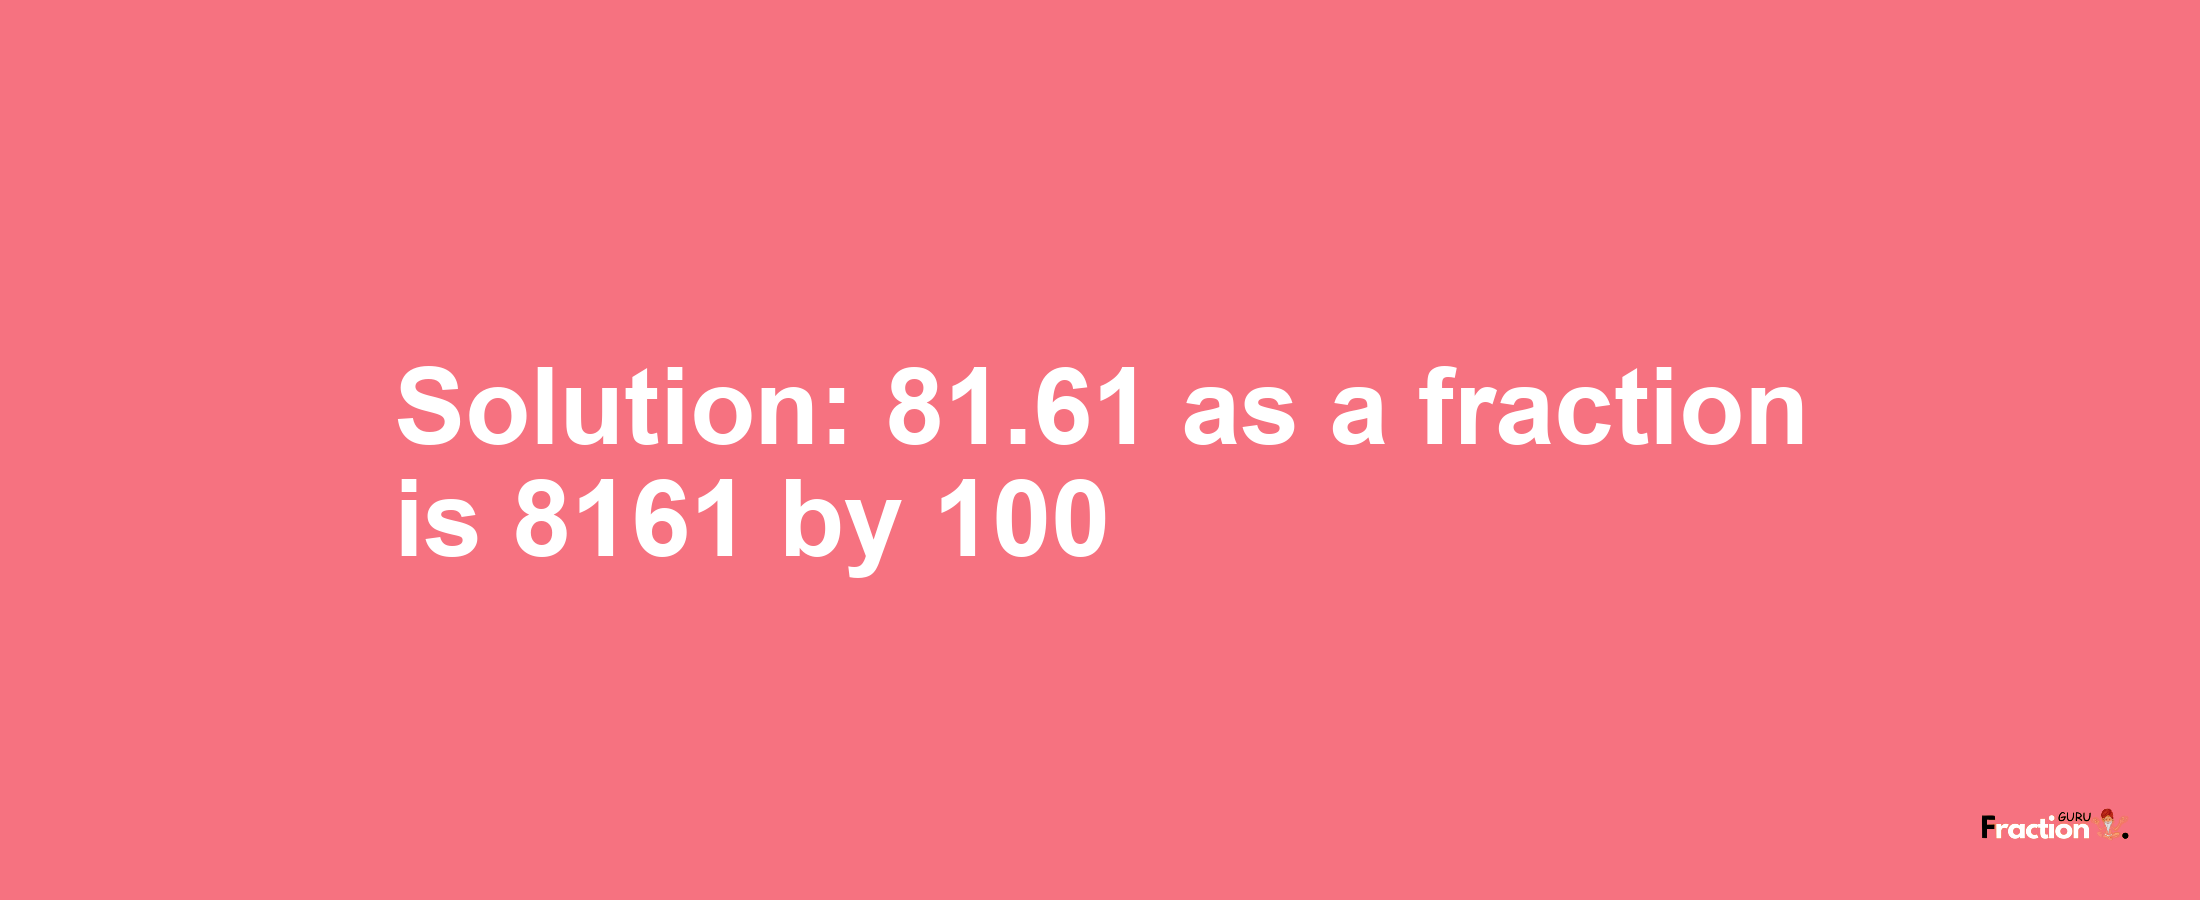 Solution:81.61 as a fraction is 8161/100